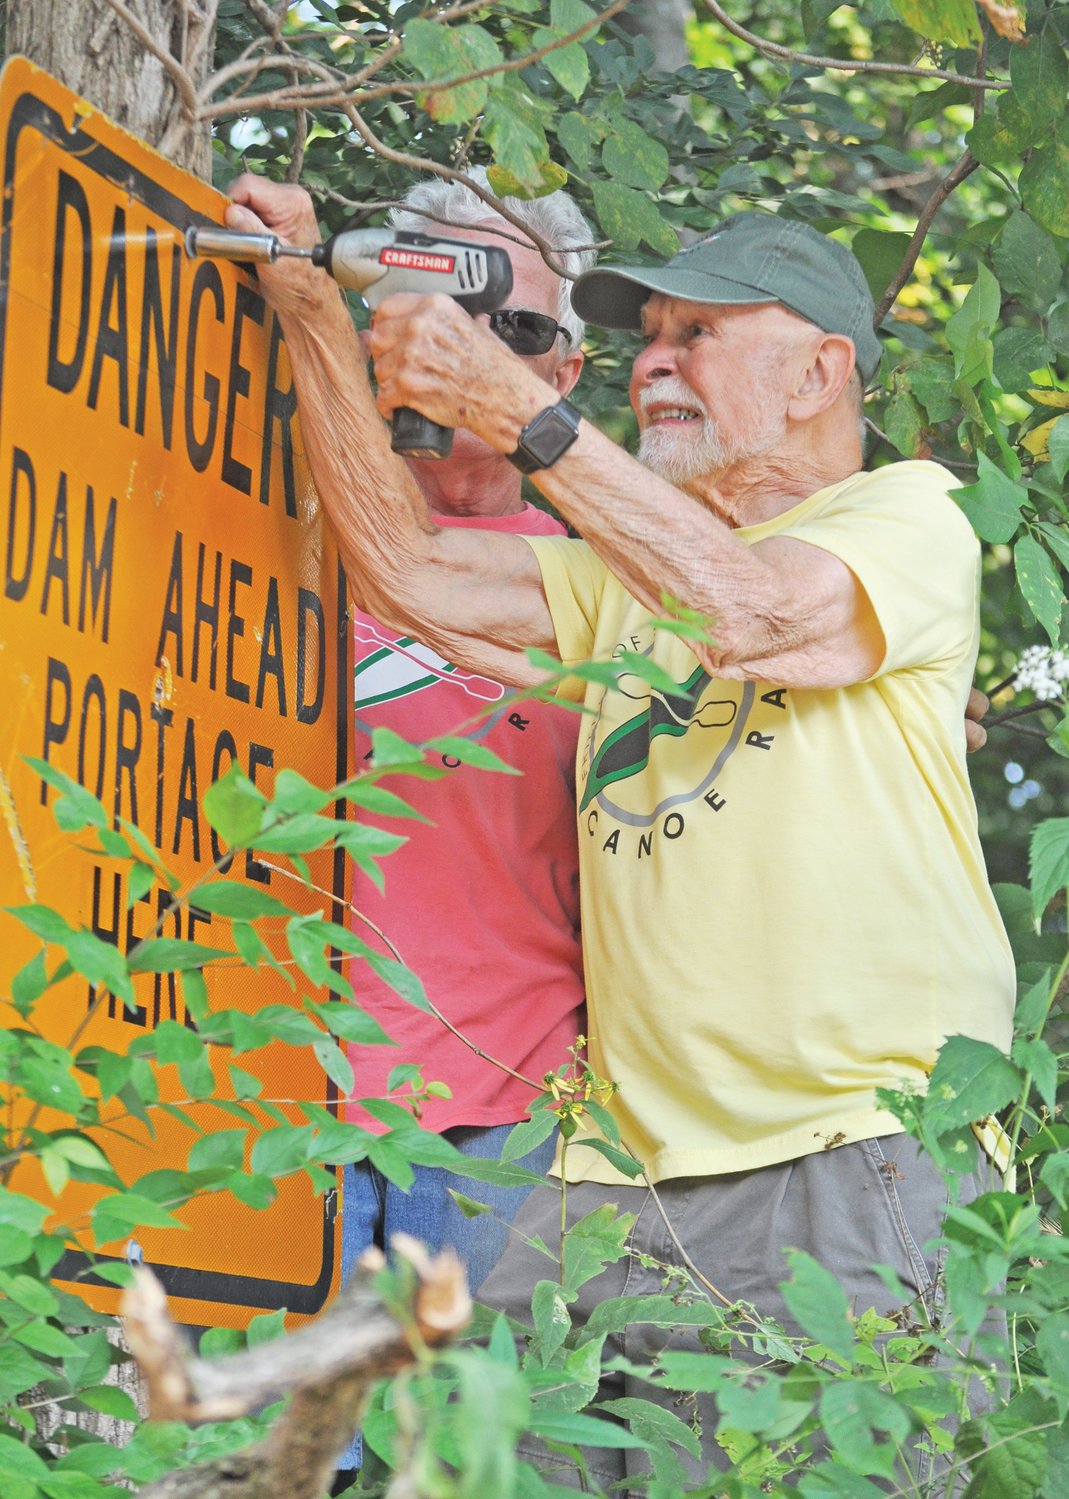 Austin Brooks, past president of Friends of Sugar Creek, works to remove a sign warning boaters of the Sugar Creek lowhead dam alongside current president Ed Fain on Monday. The dam was demolished last week.